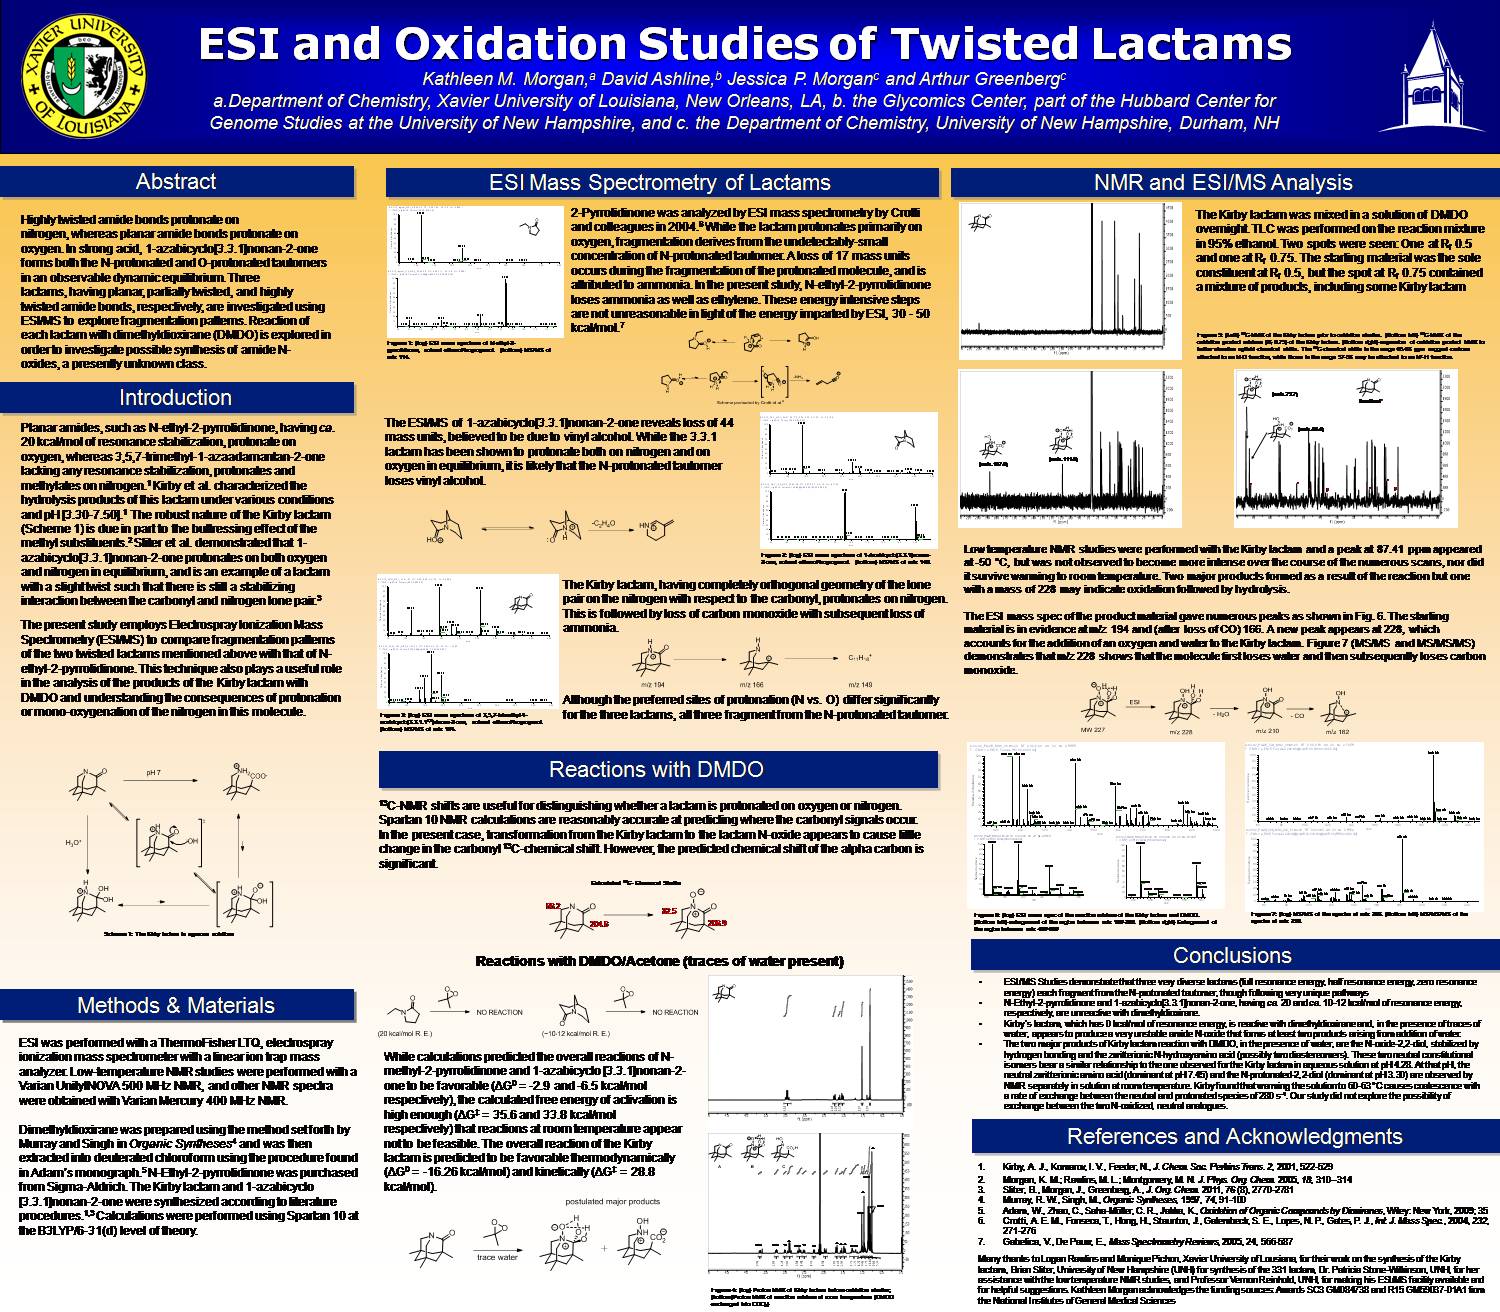 Esi And Oxidation Studies Of Twisted Lactams by jessmorgan1178